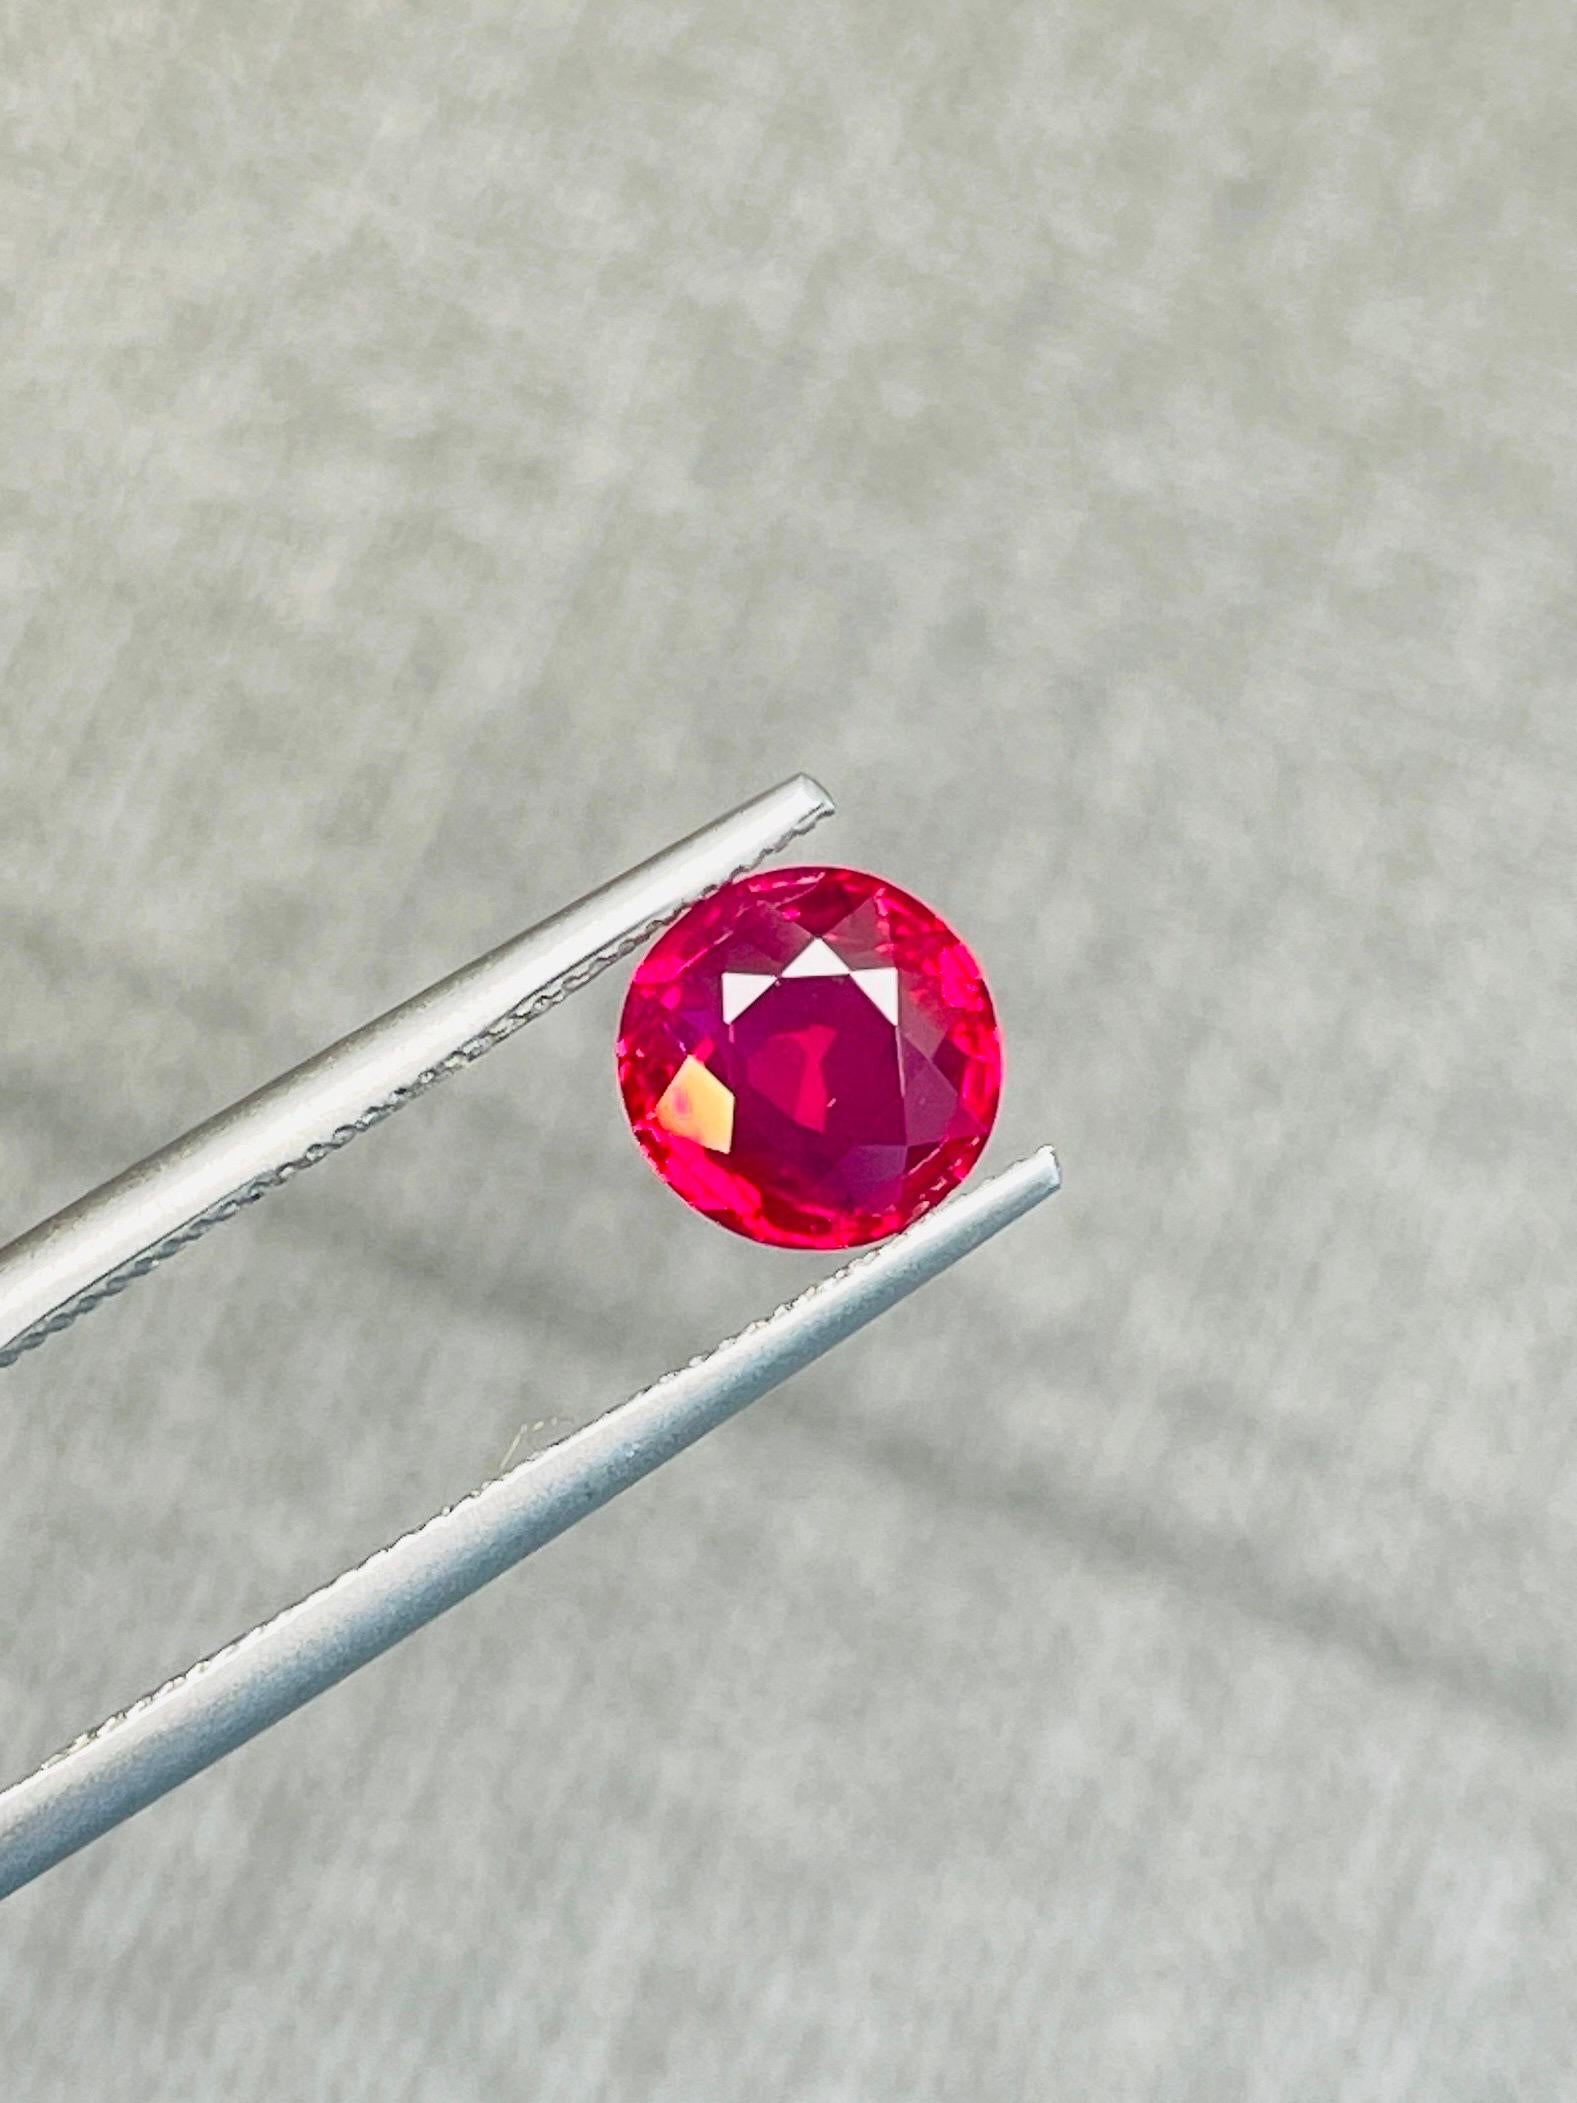 Perfect quality of burma ruby pigeon blood Unheated 1.08ct AIGS certified  3